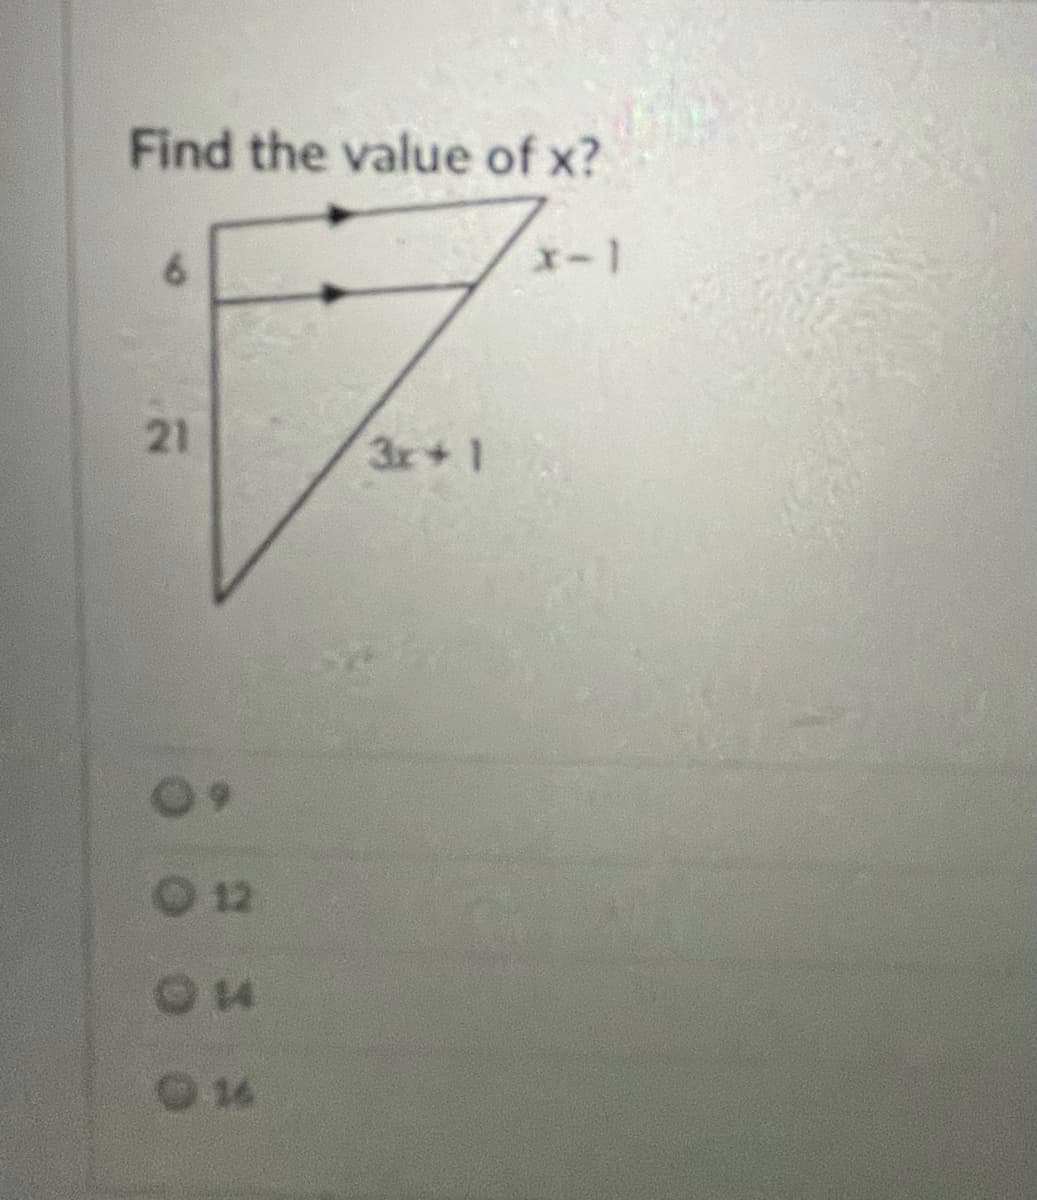 Find the value of x?
6.
x-1
21
3x+1
0 12
16
